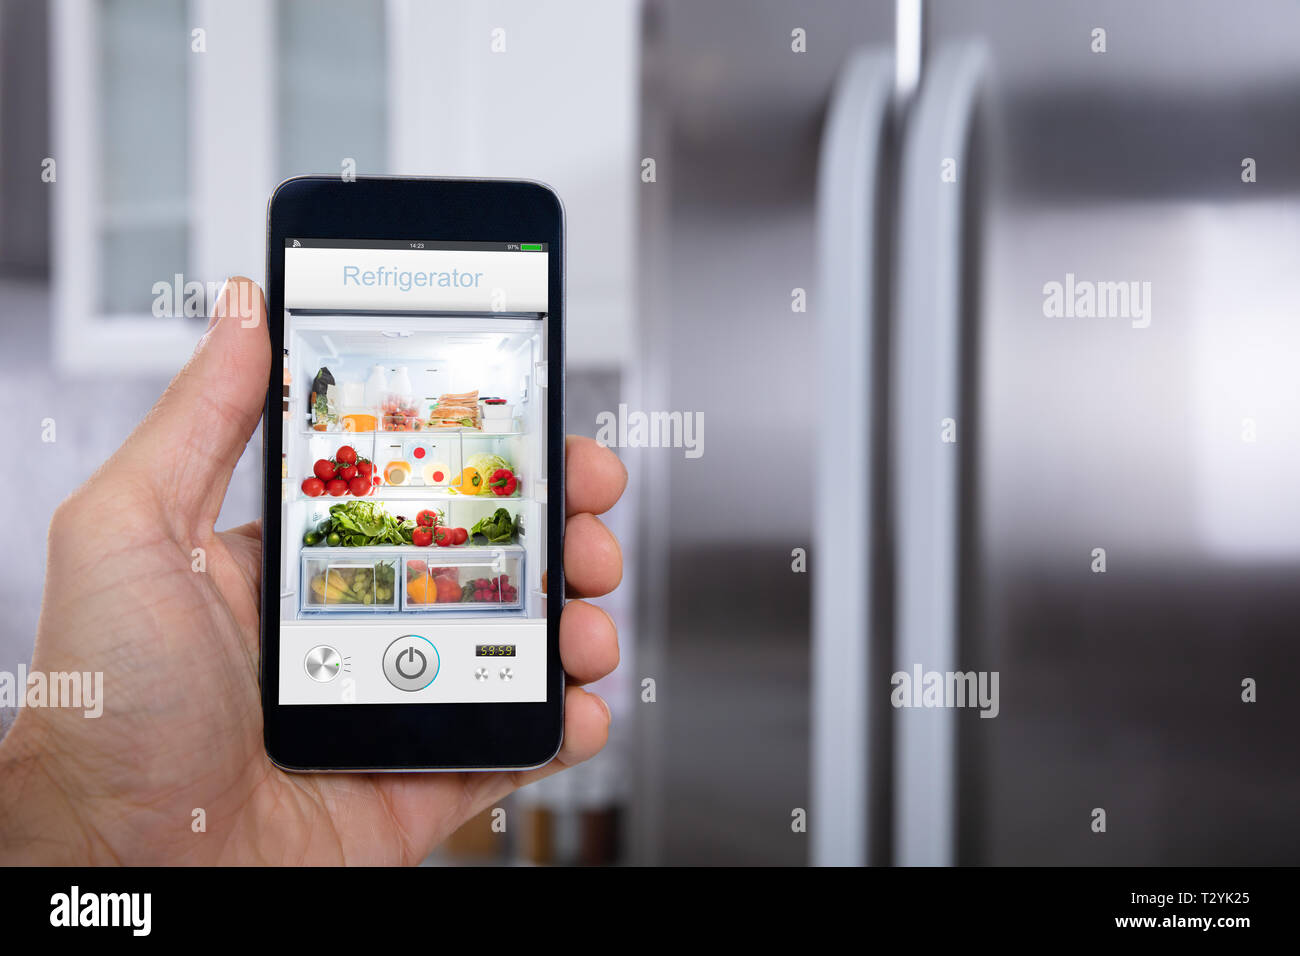 Close-up Of A Person's Hand Operating Refrigerator With Mobile Phone Stock Photo